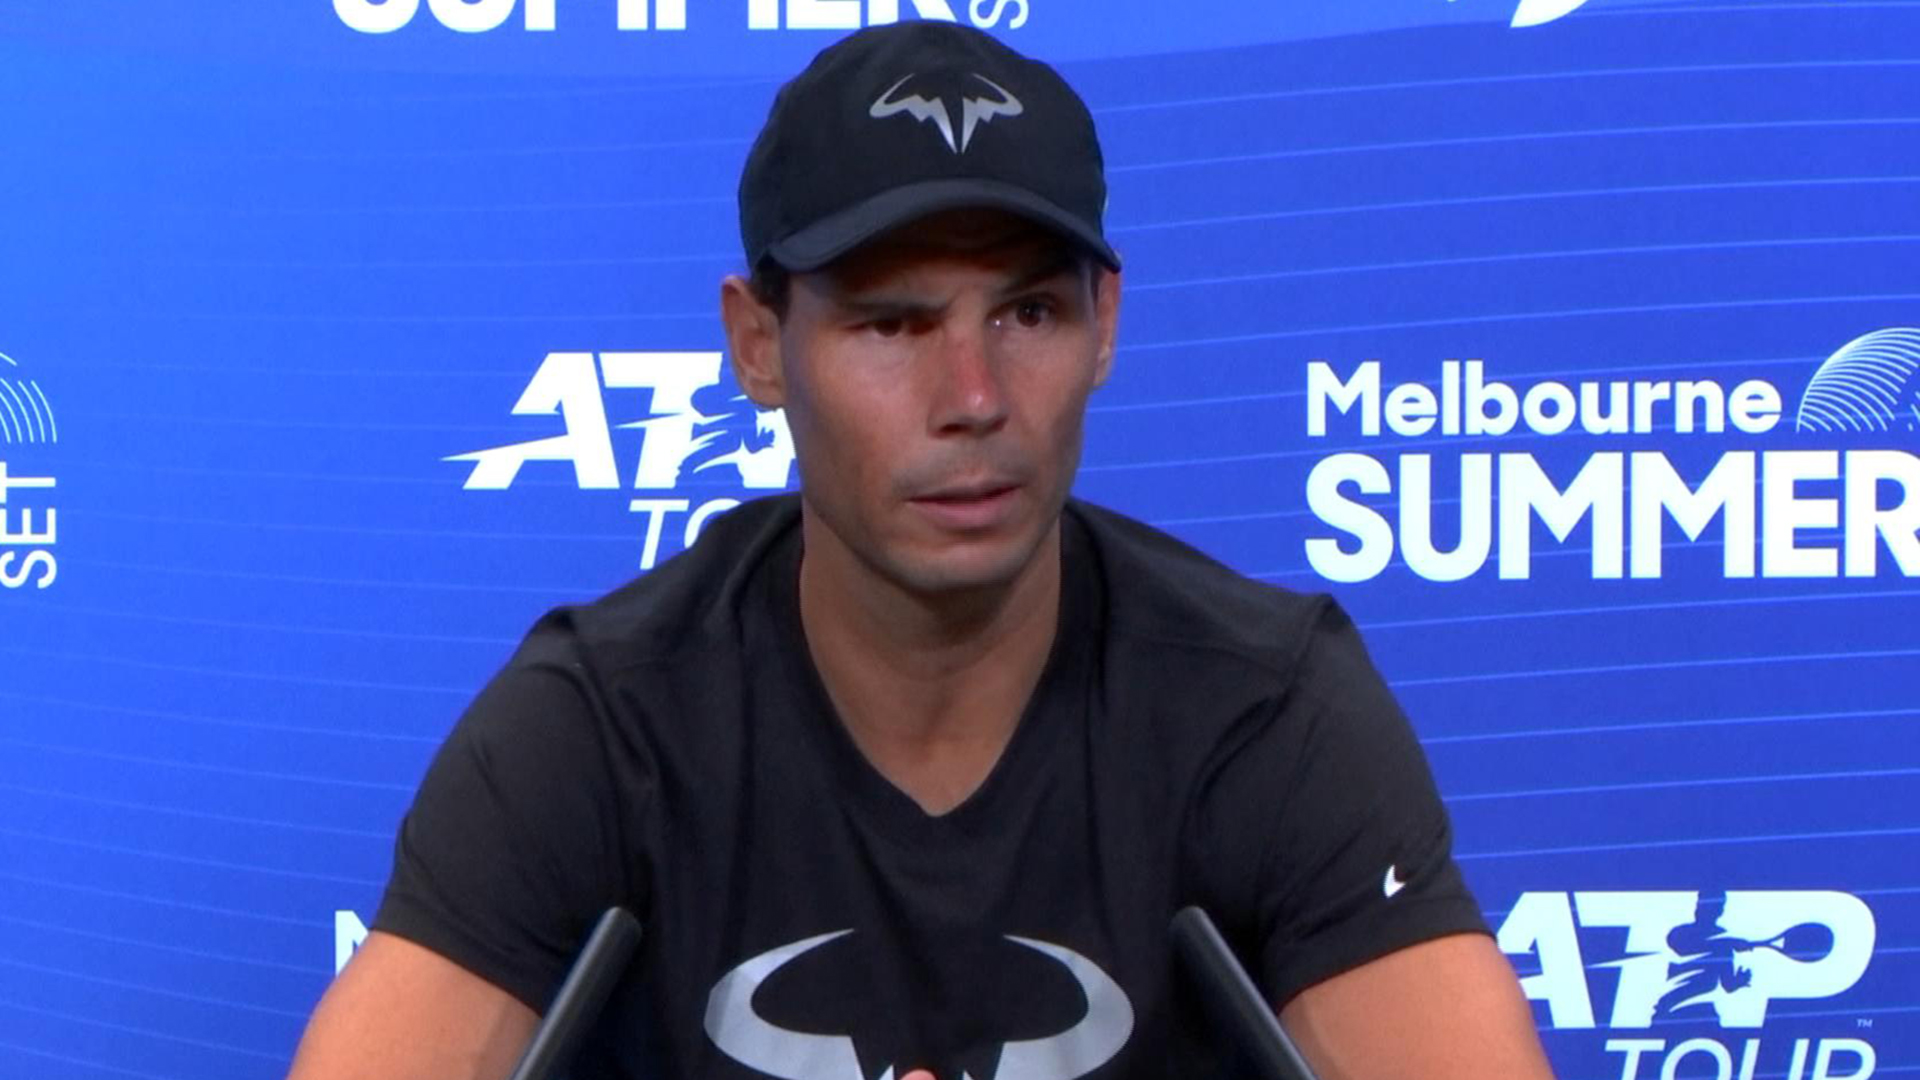 Nadal on Djokovic: 'If he wanted, he would be playing here in Australia without a problem' - TSN